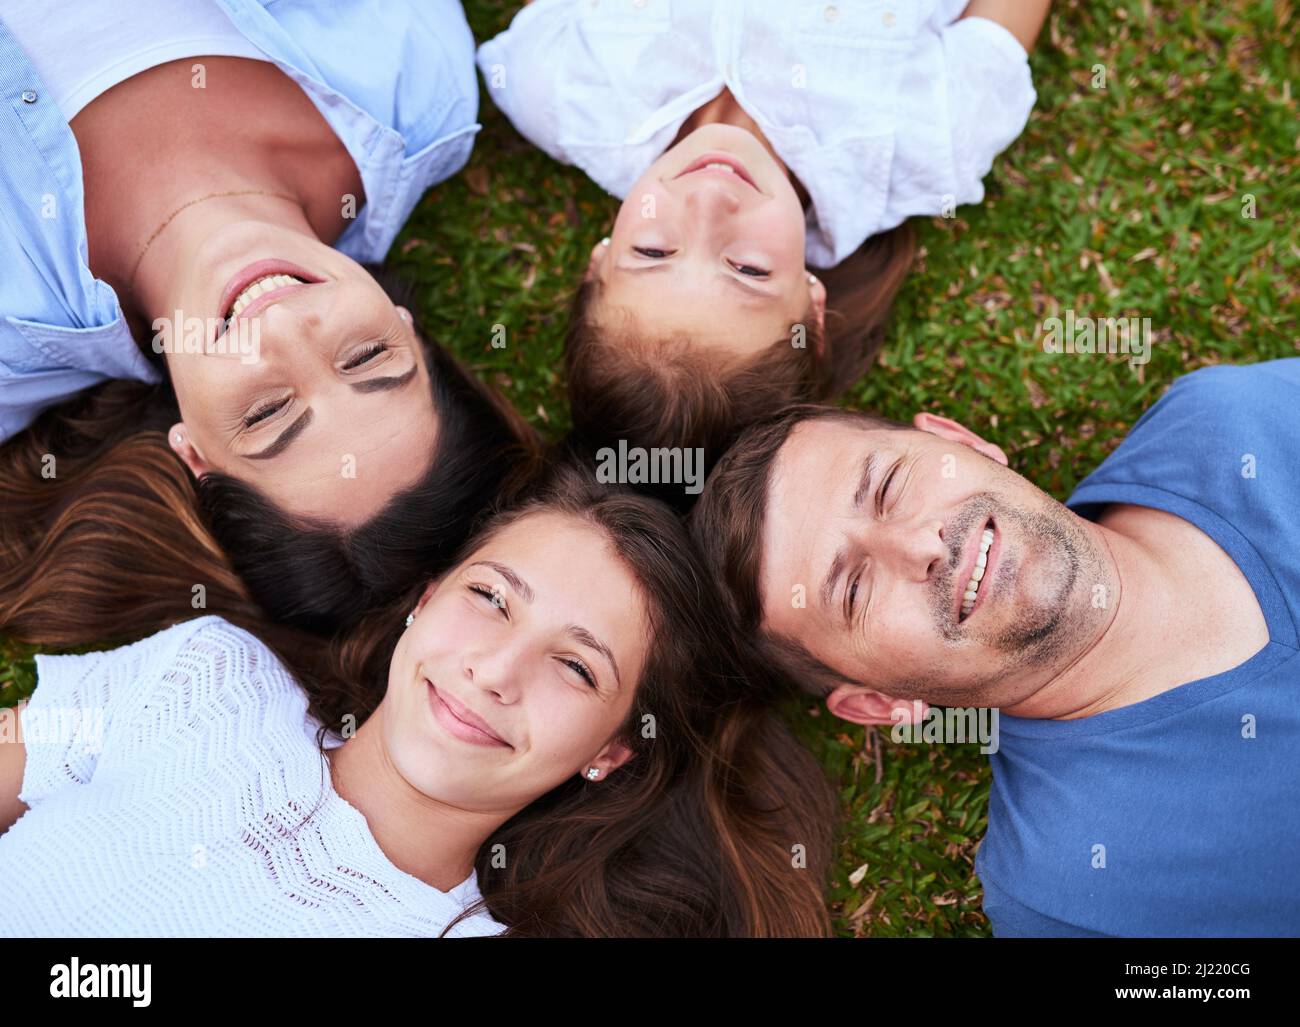 Were just a bunch of peas in a pod. Portrait of a cheerful family lying on the ground together outside in a park during the day. Stock Photo